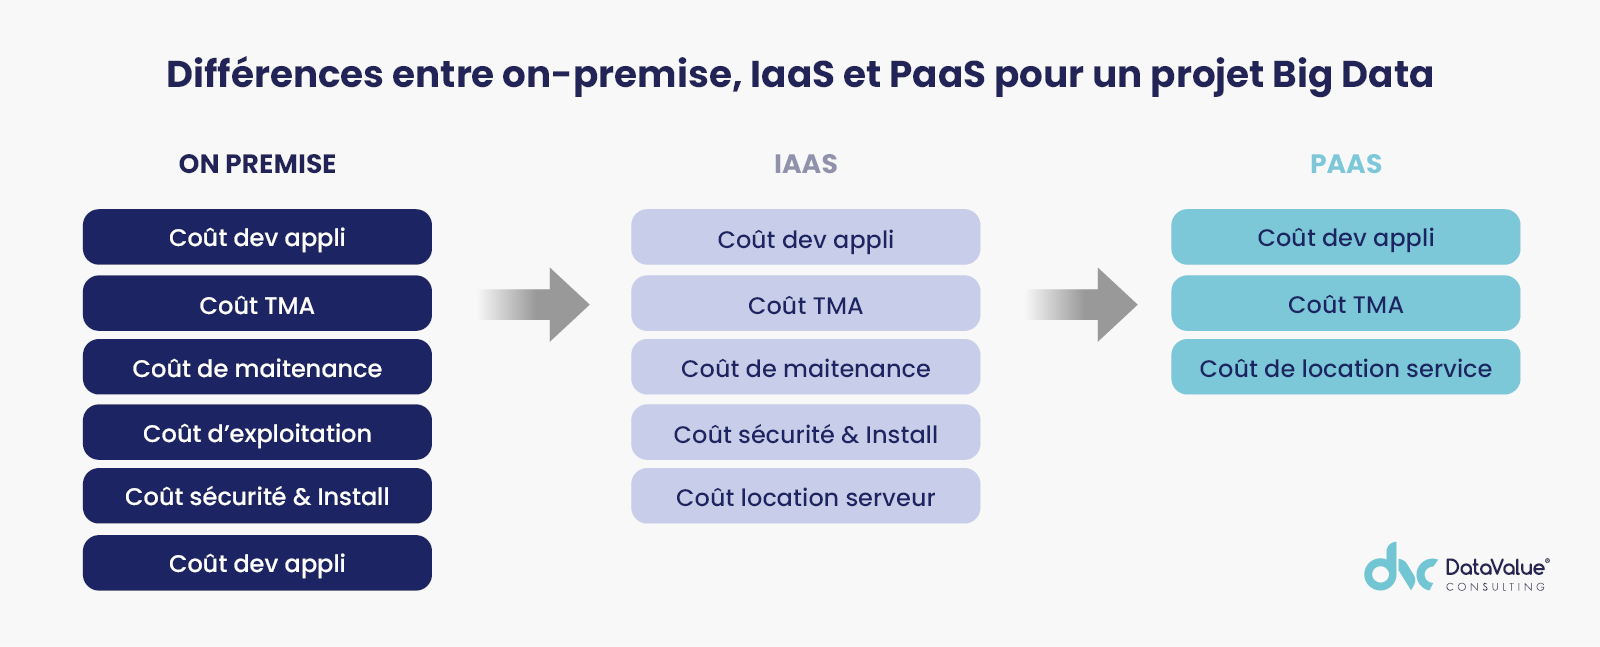 differences-on-premise- IaaS-PaaS-projet-big-data